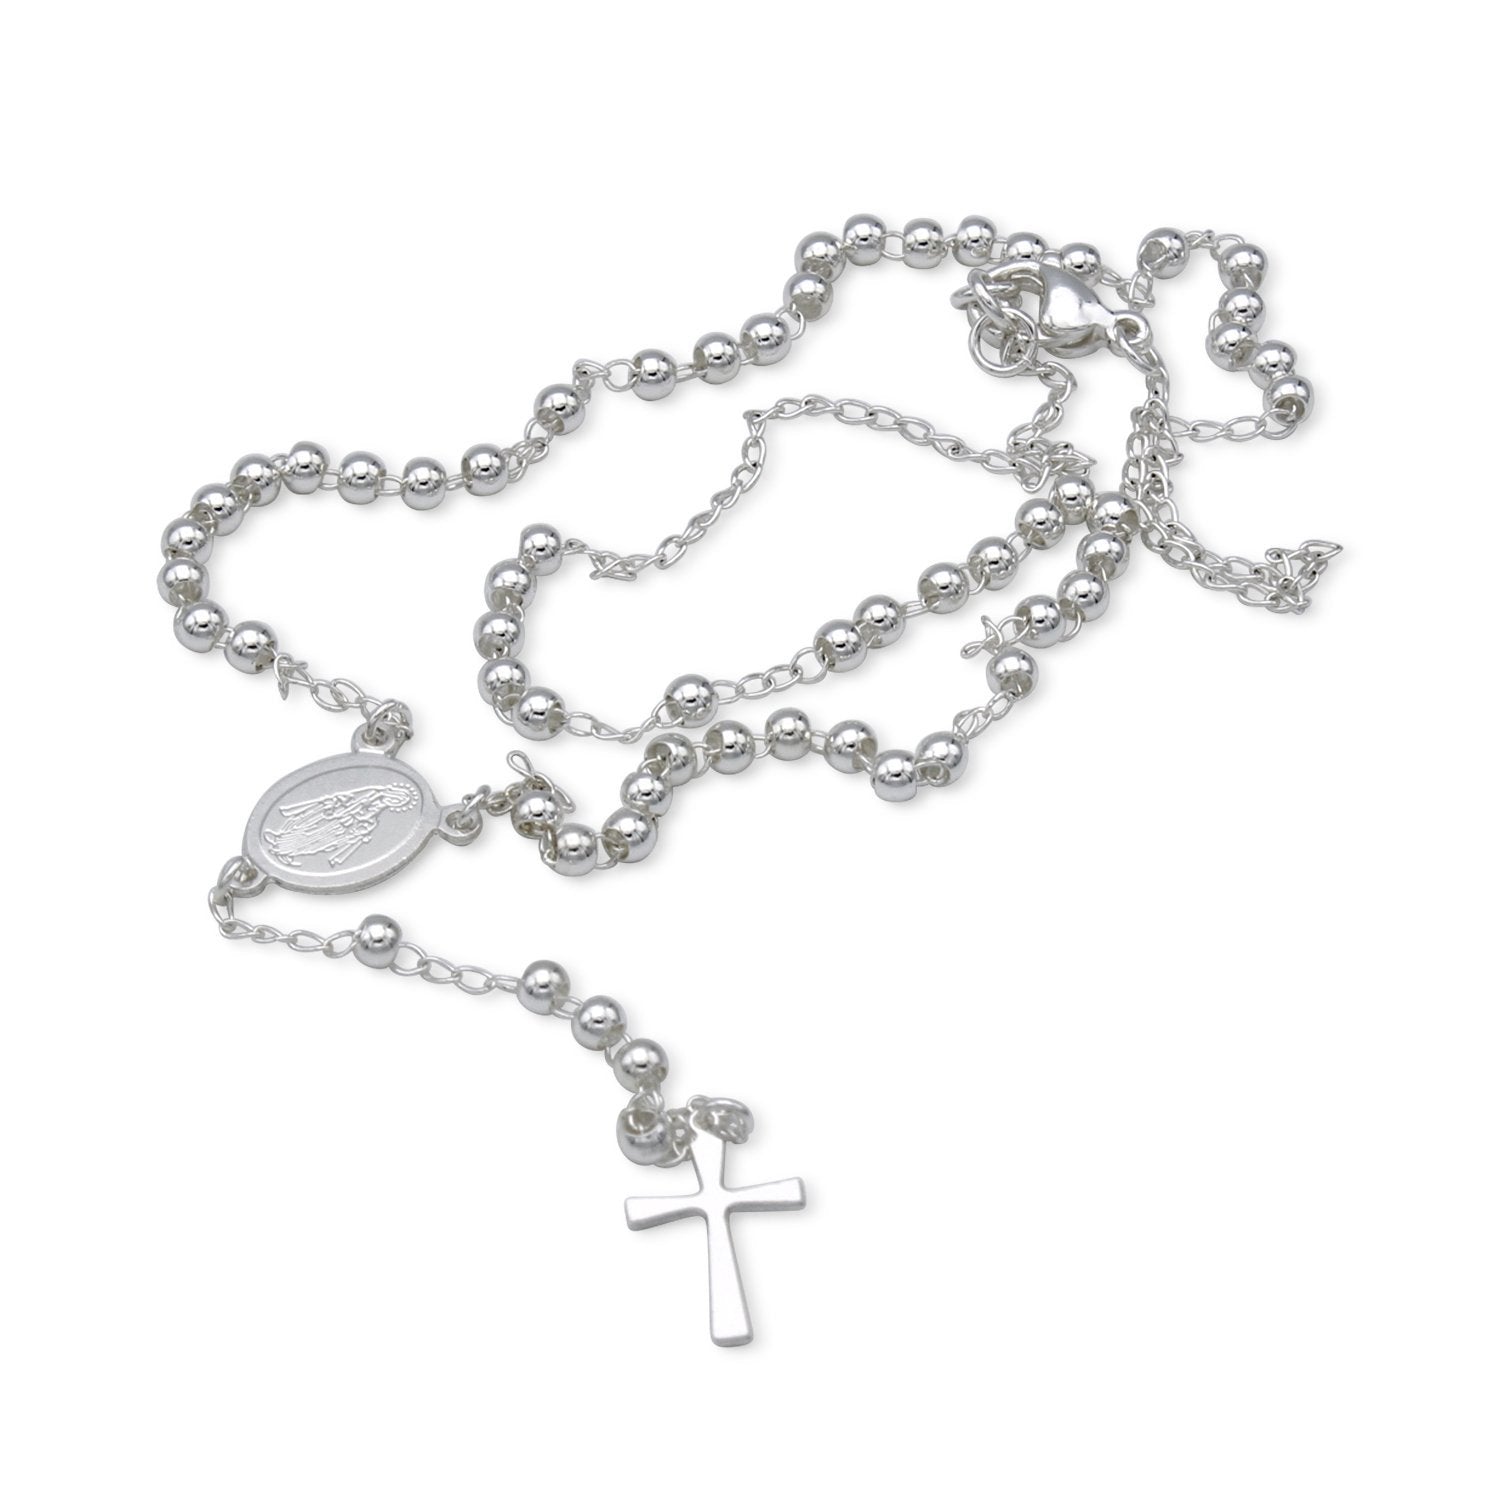 Traditional Silver Rosary Necklace Five Decade Catholic Prayer Beads  3mm